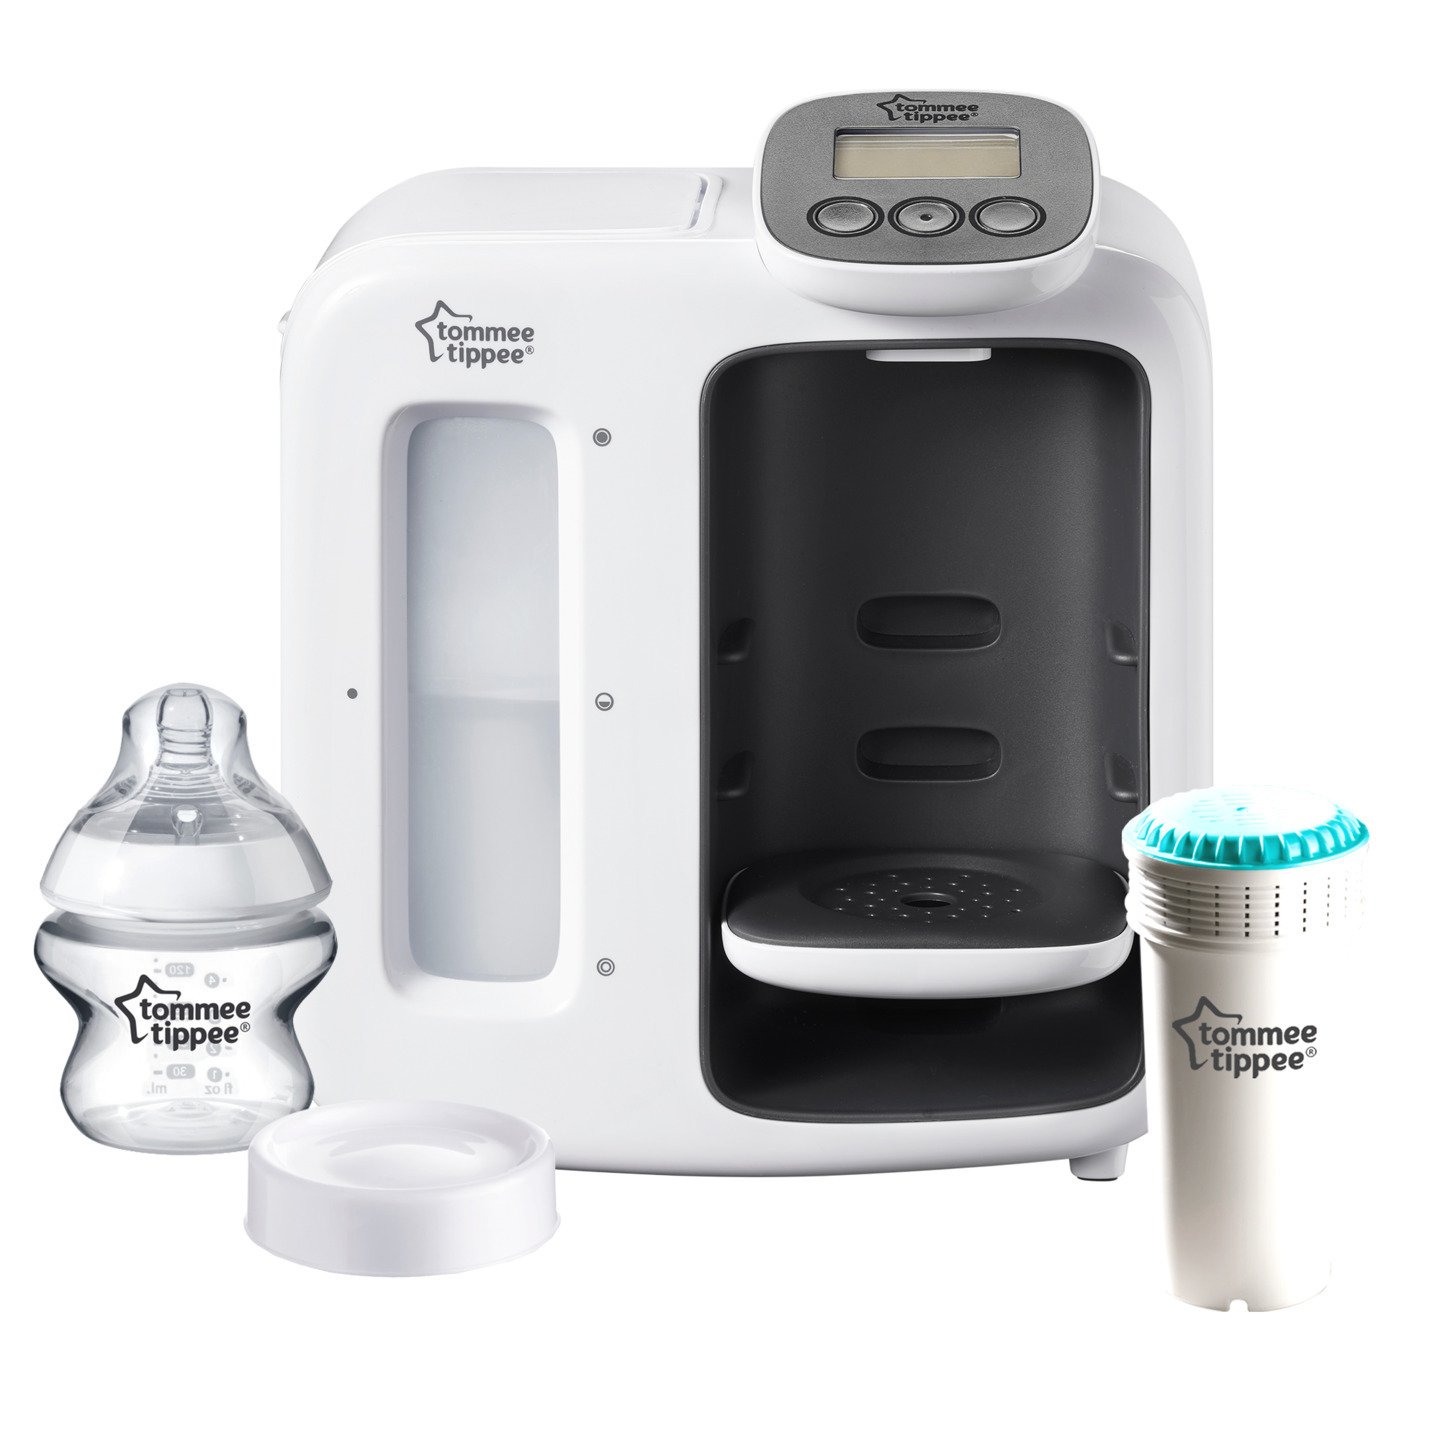 Tommee Tippee Ctn-Fed60-Wht Perfect Prep Day & Night Bottle Maker, Transpar